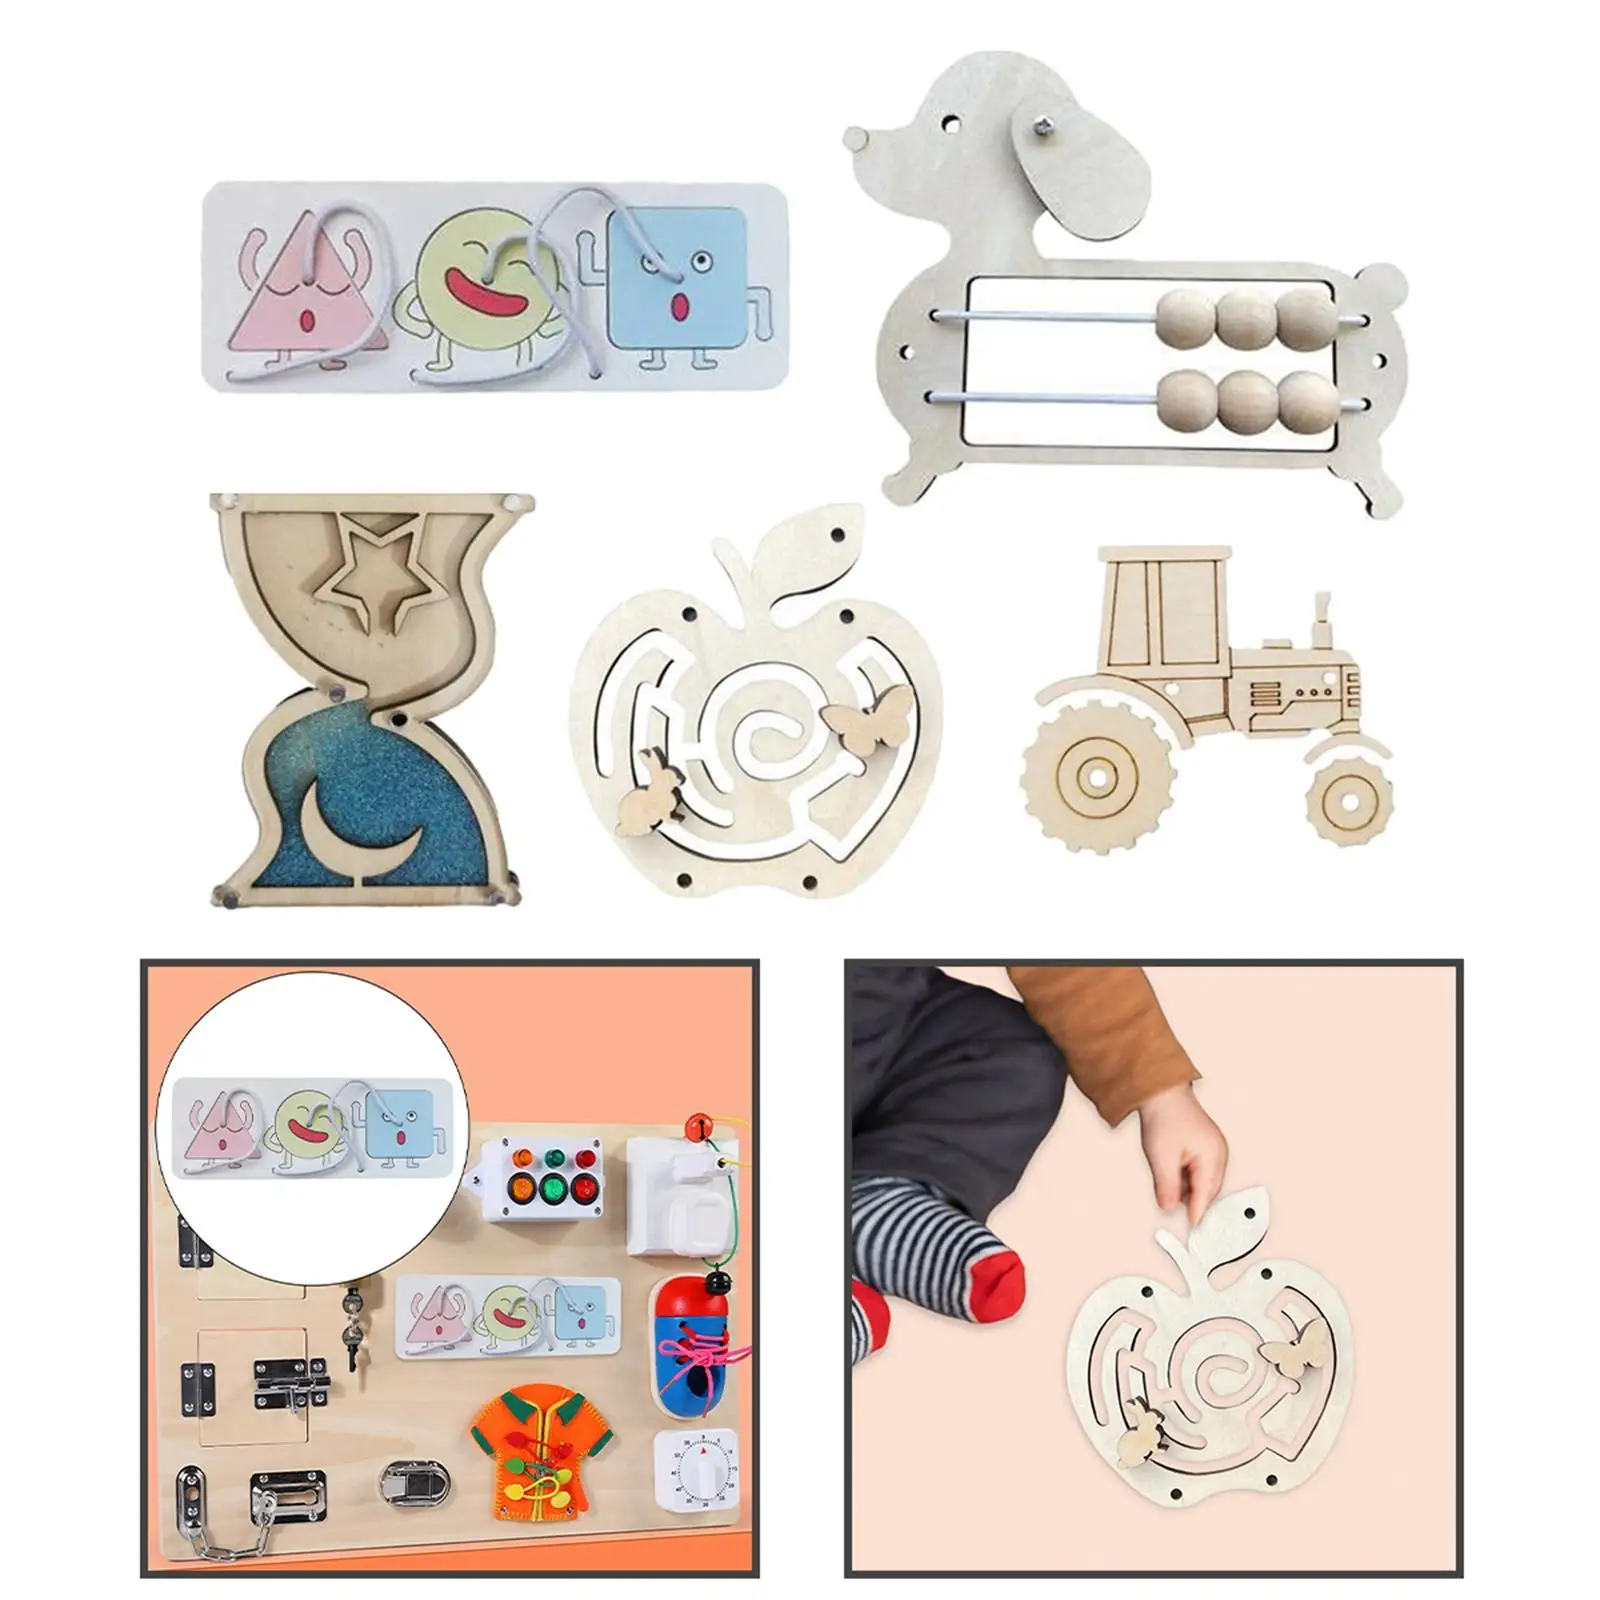 Sensory Board Accessories Cognition Toy Game for Kids Birthday Gift